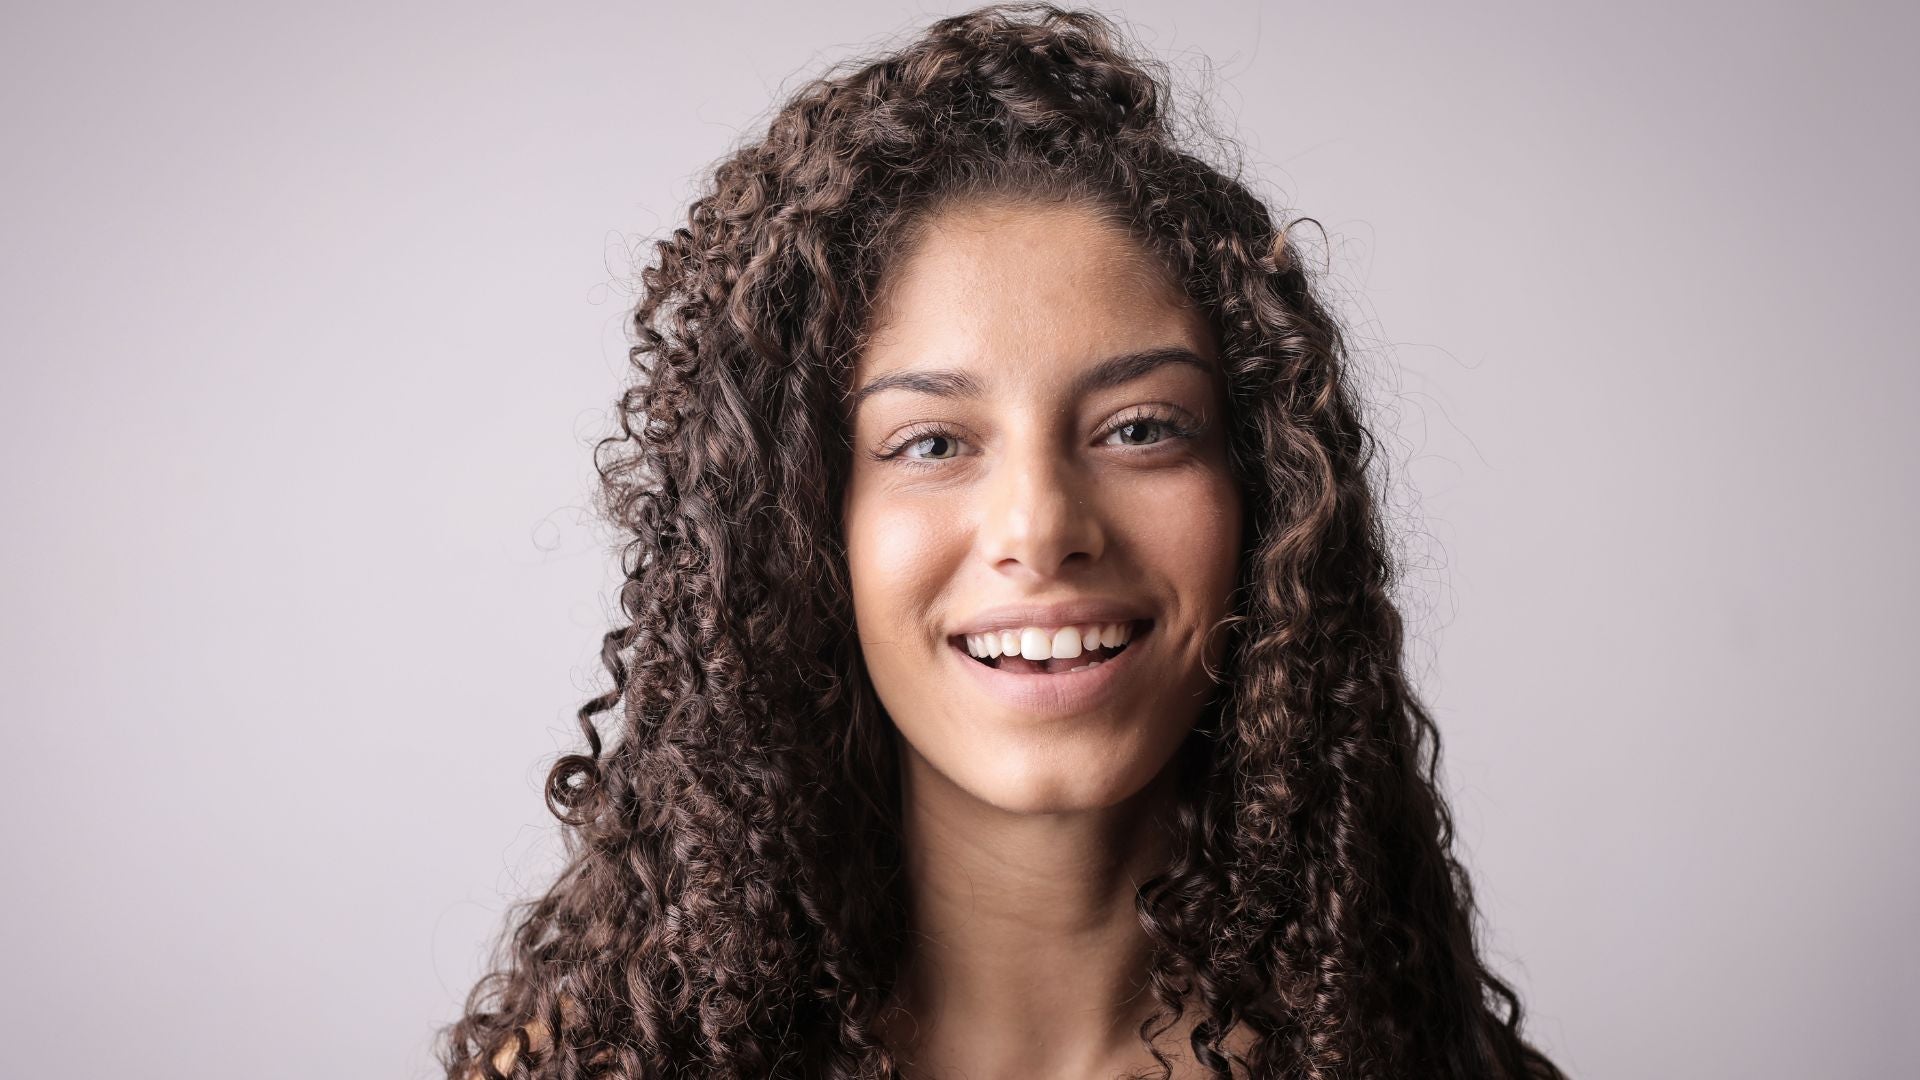 Silk vs. Satin Pillowcases: Which Are Better for Curly Hair?